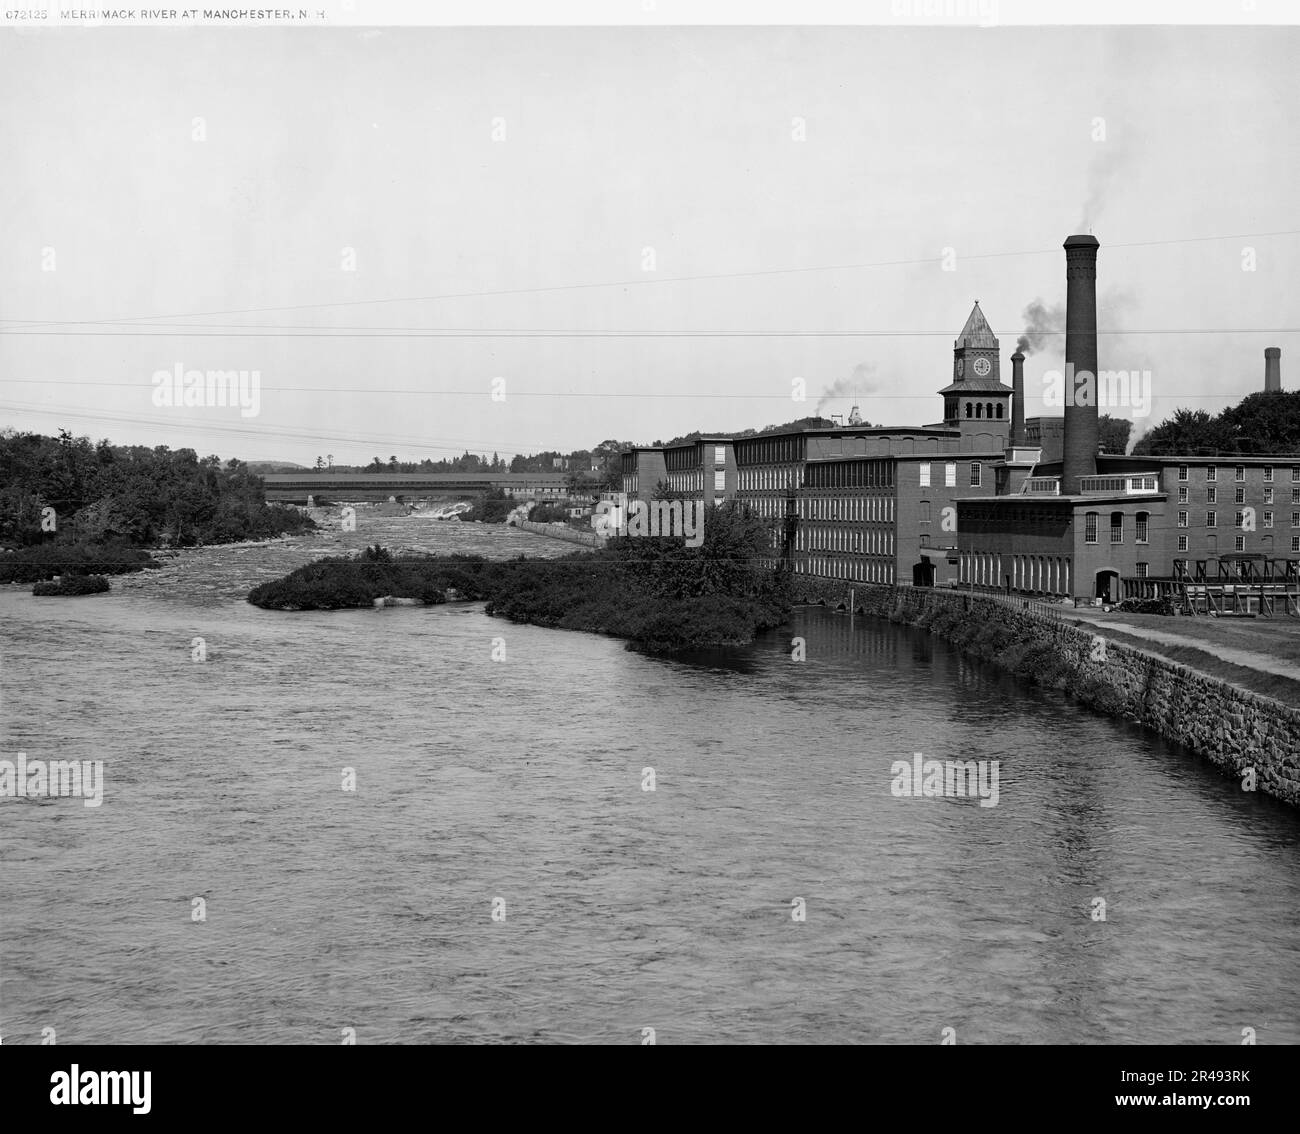 Merrimack River at Manchester, N.H., between 1900 and 1920. Stock Photo